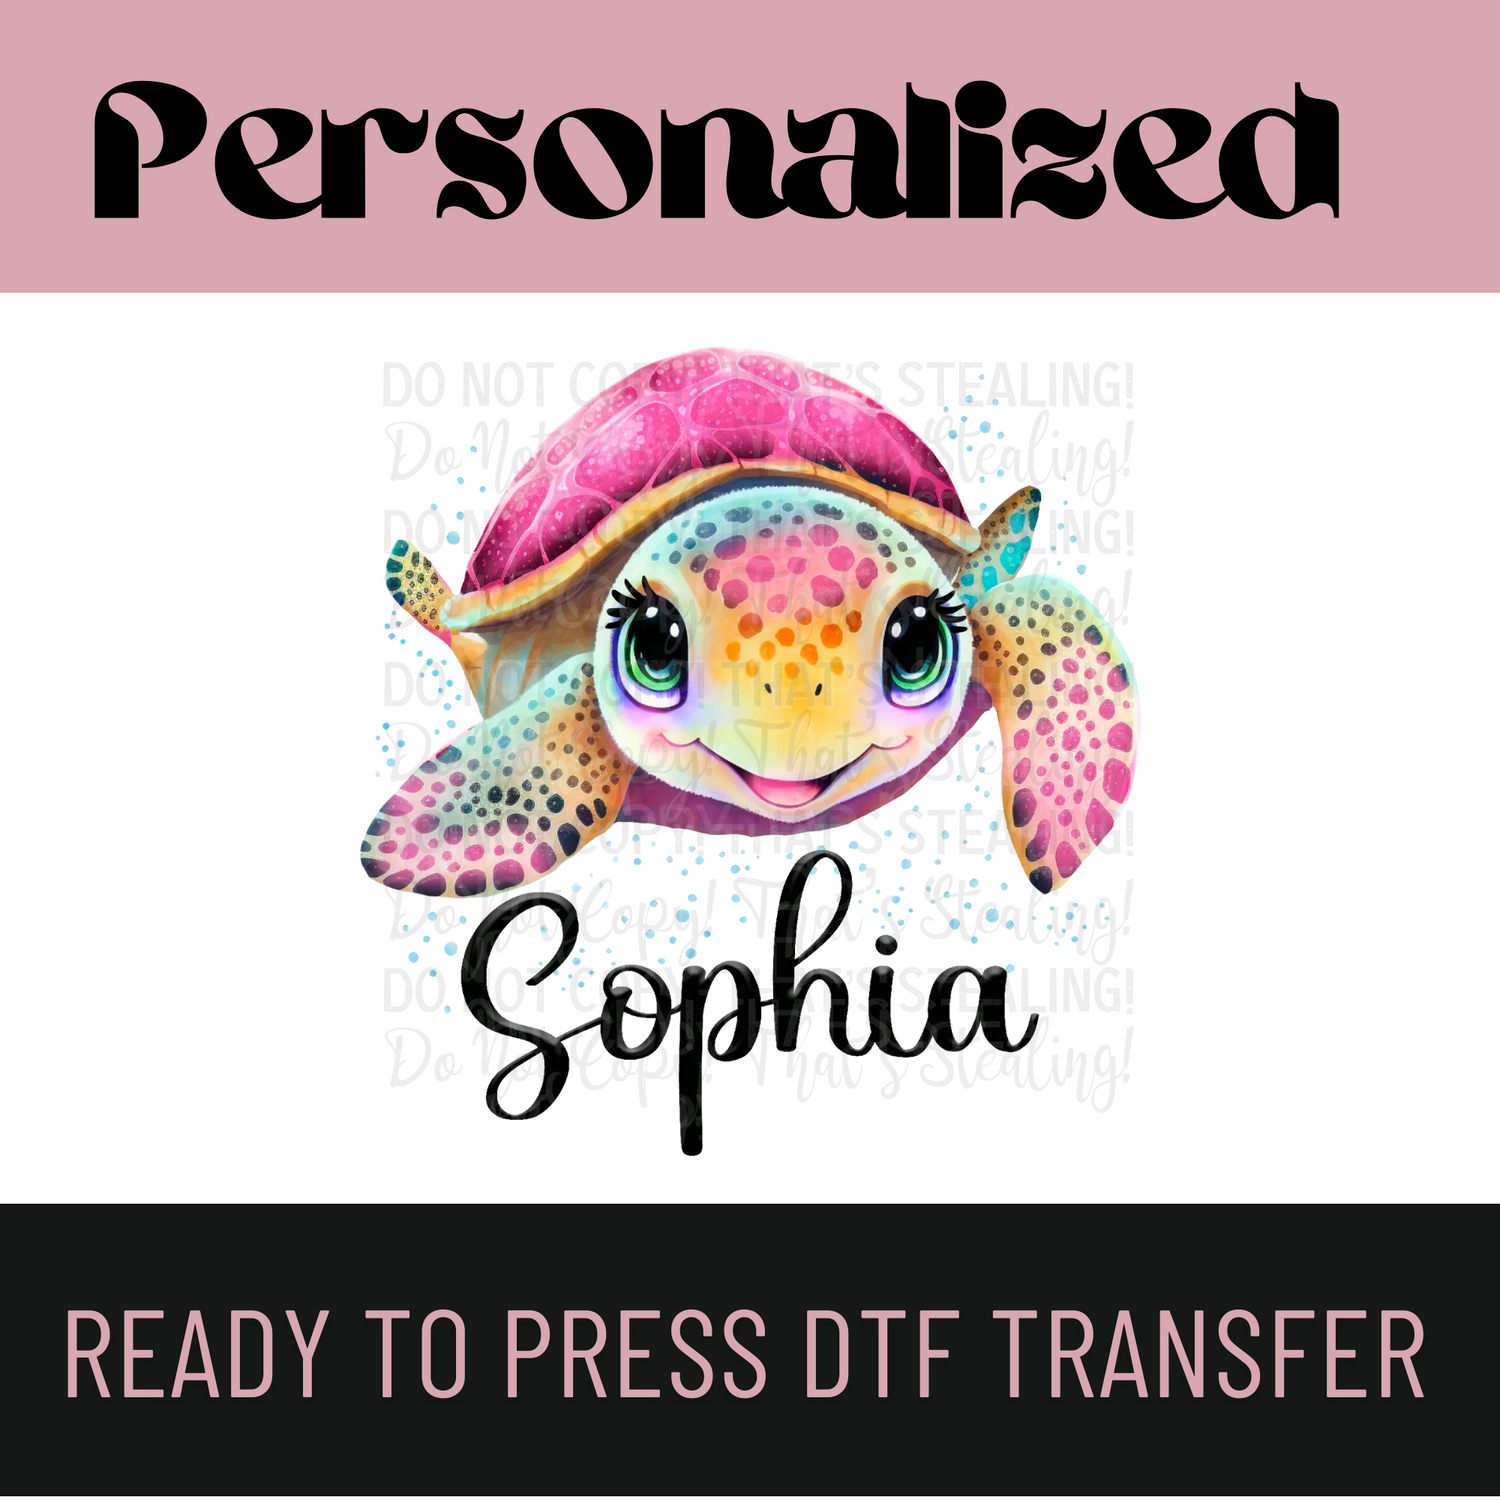 Personalized DTF Transfers